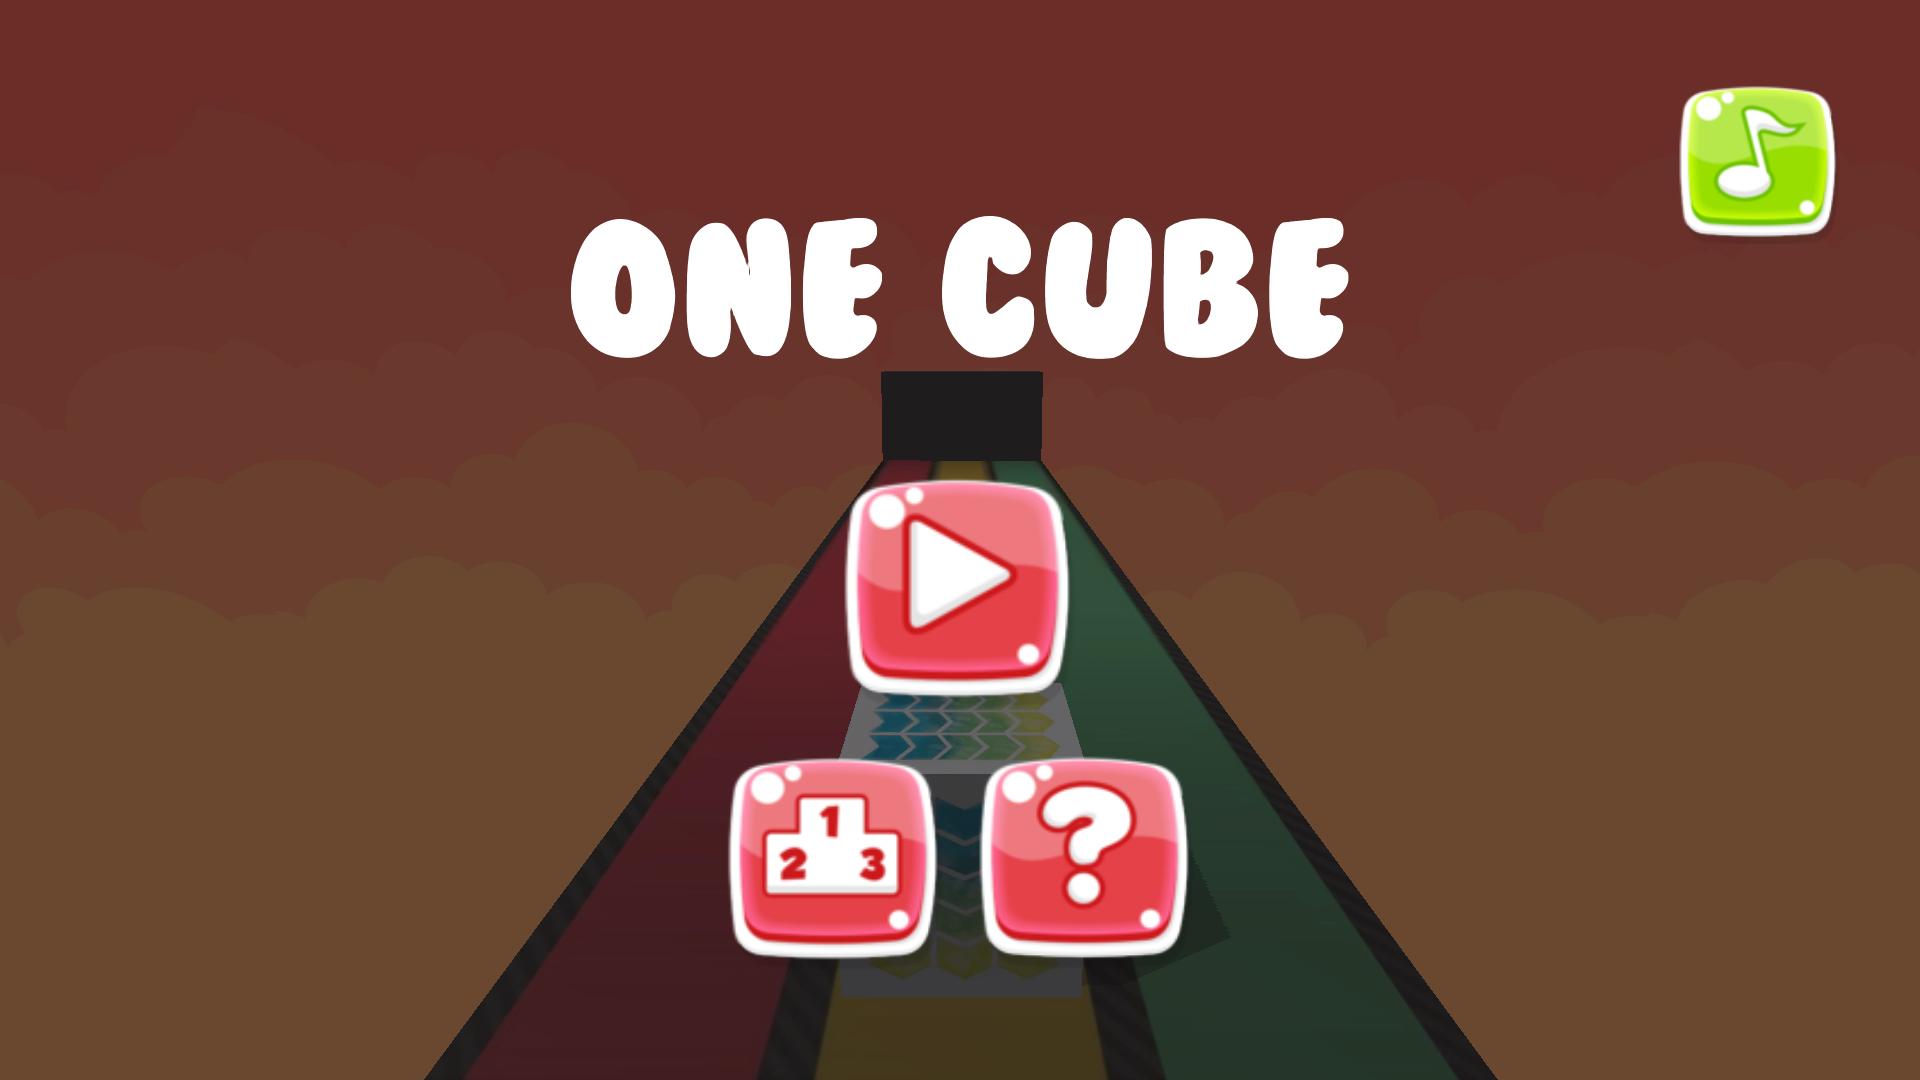 One Cube. Squeare-1 Cube.